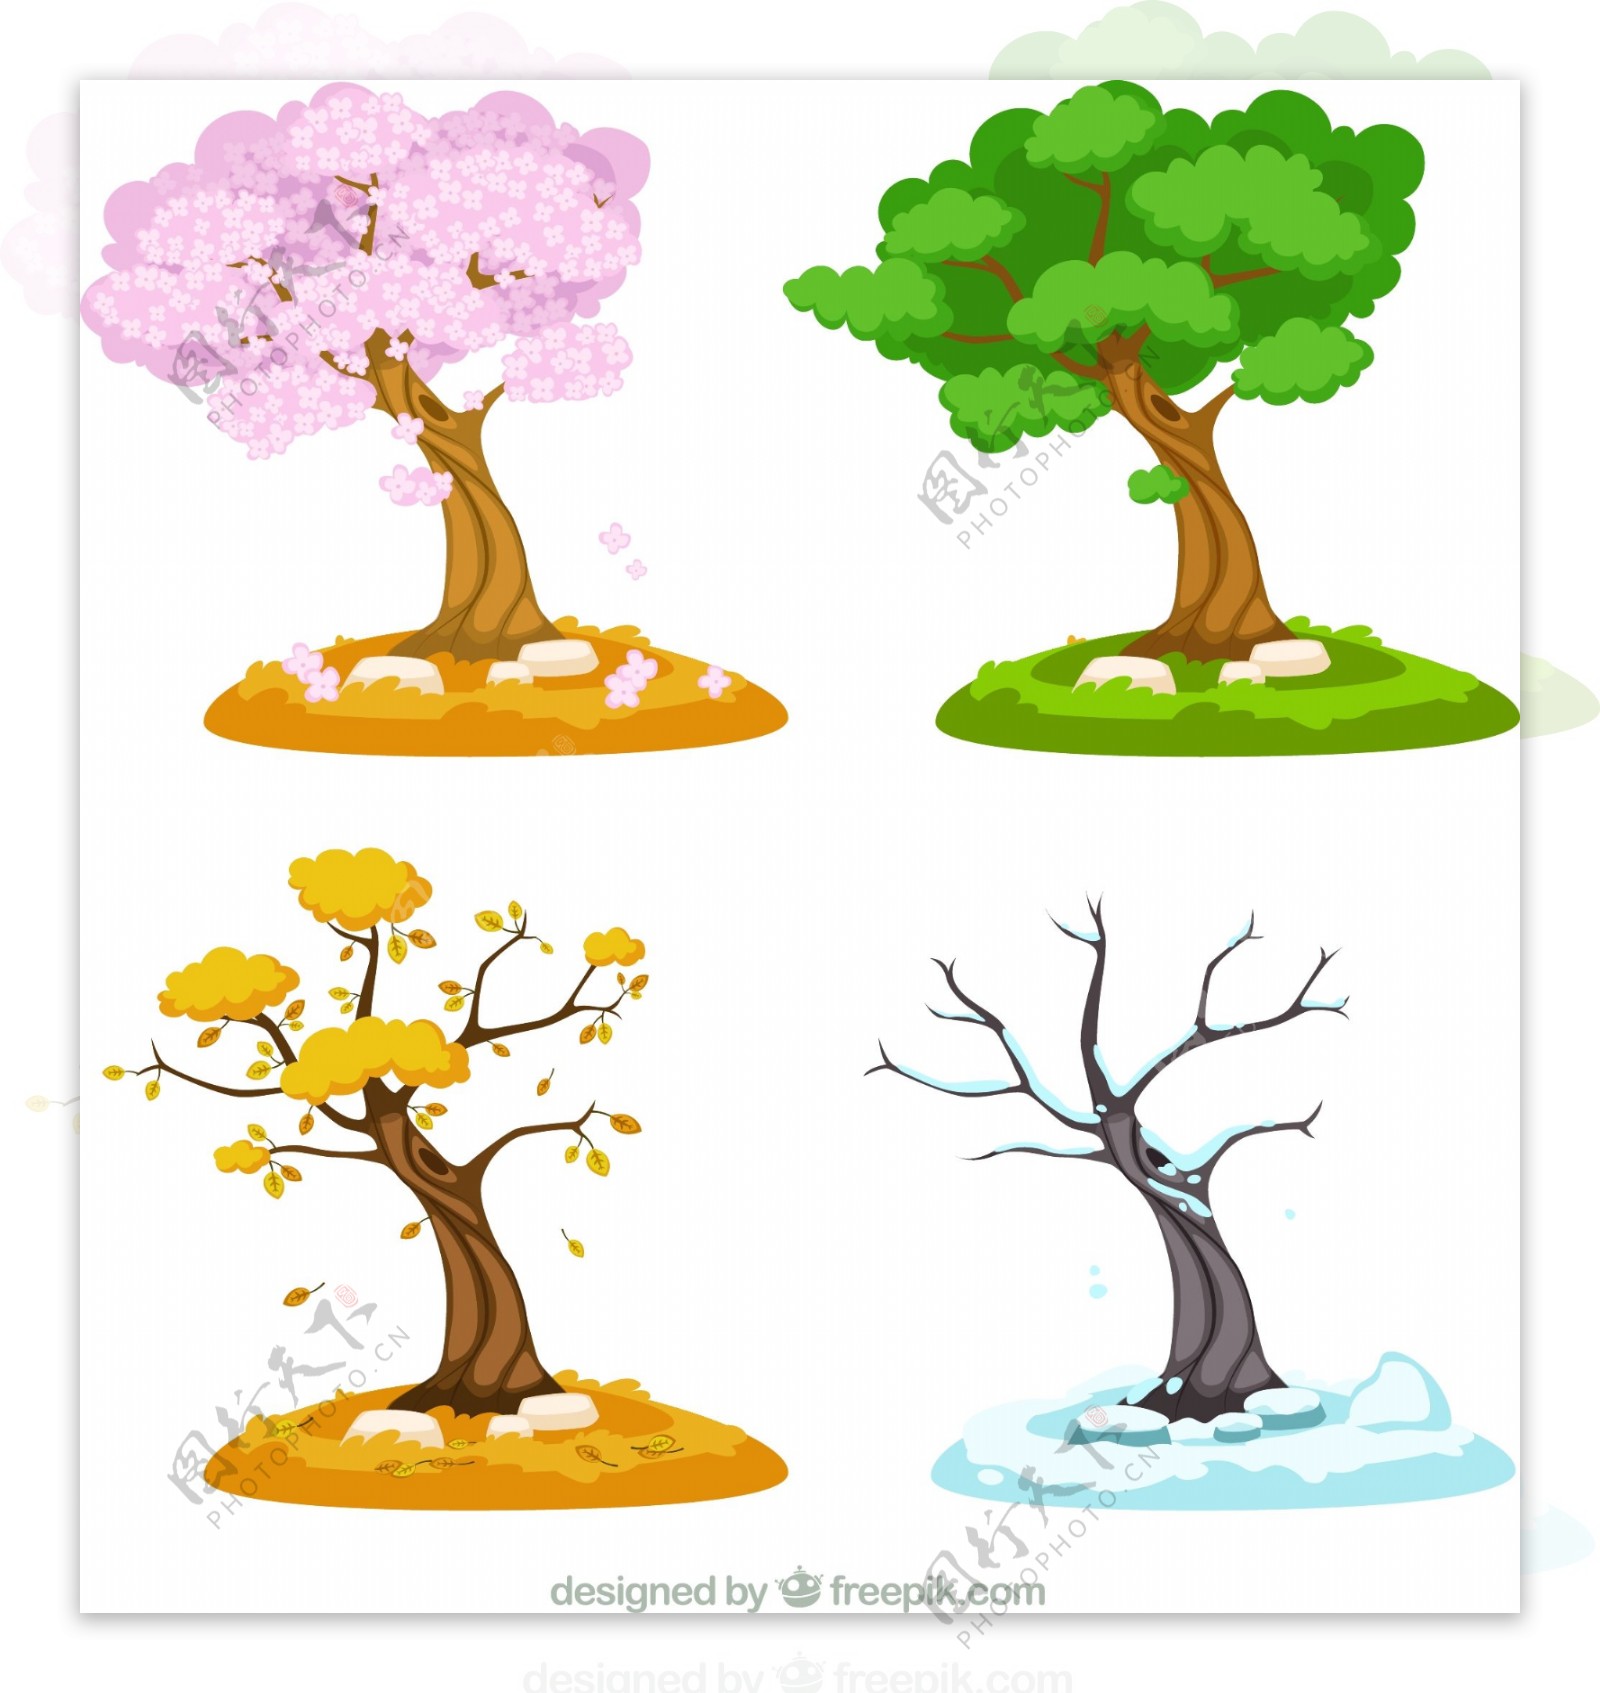 Scenery of the Four Seasons of Nature with Landscape Spring, Summer, Autumn and Winter in ...